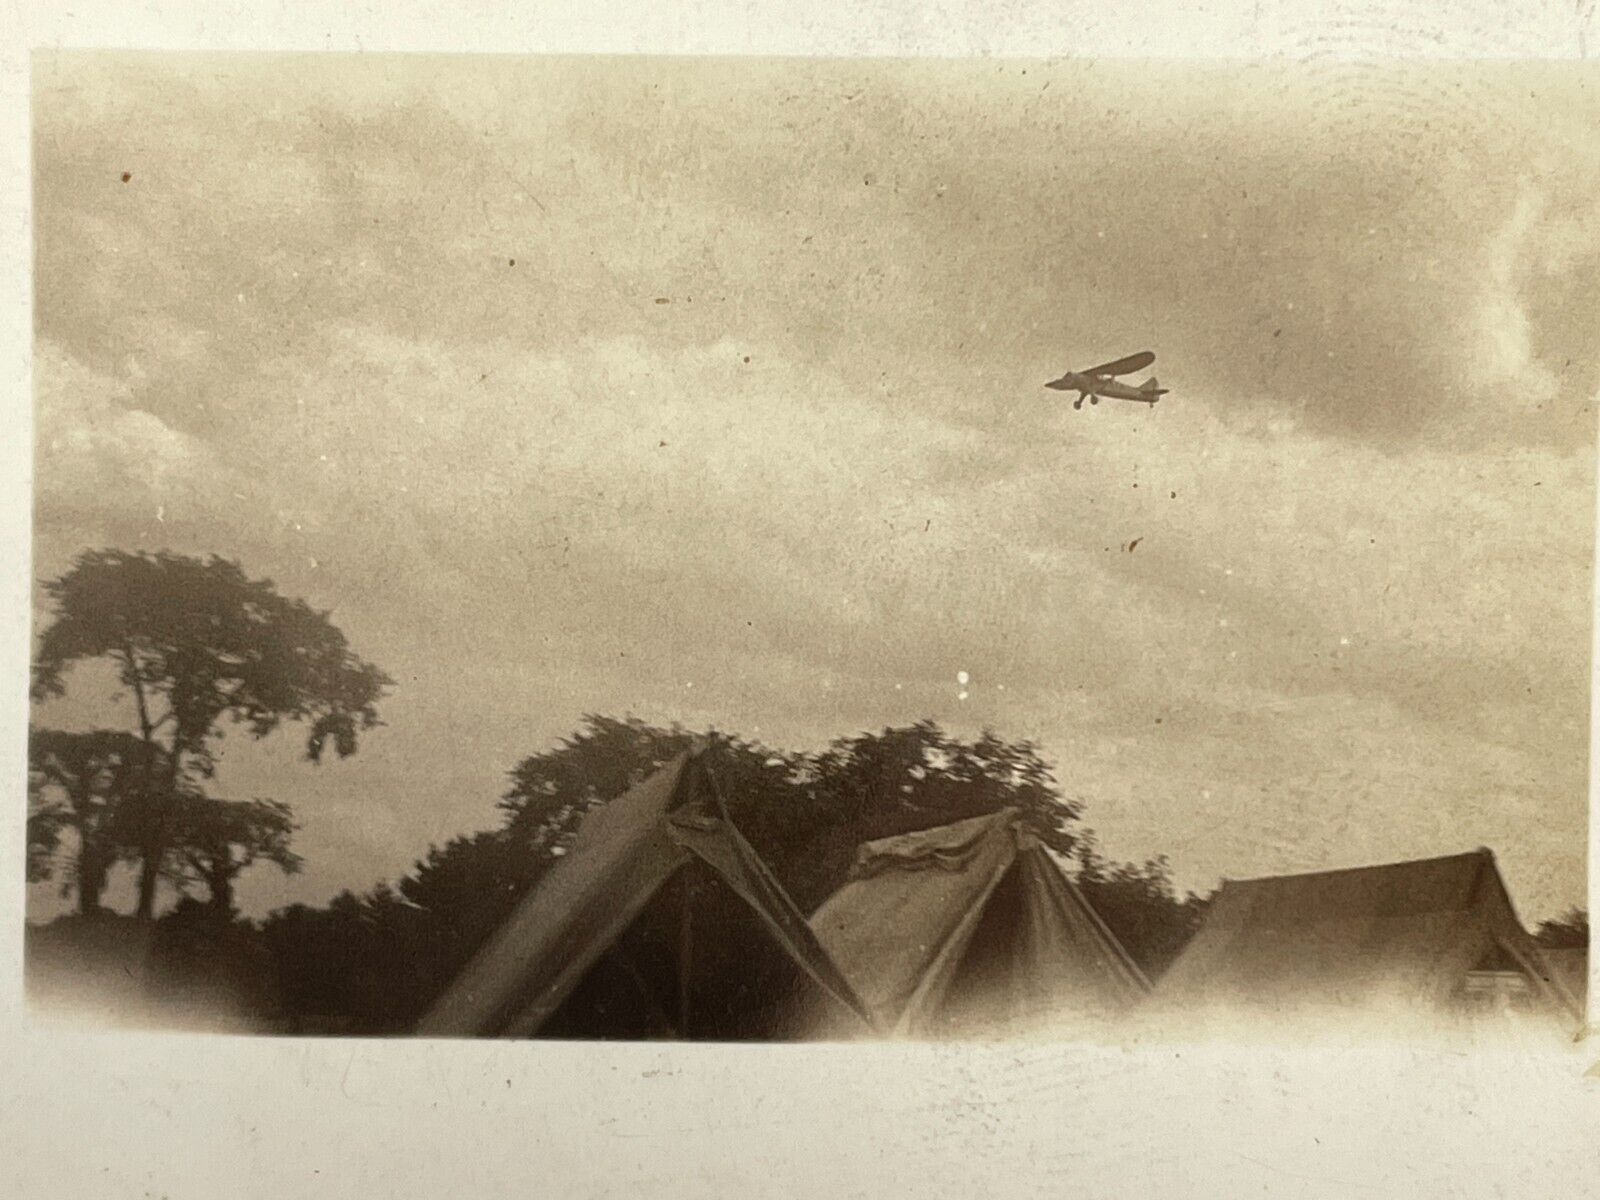 WH Photograph Plane Airplane Flying Over Tops Of Tents Artistic POV View 193-40s